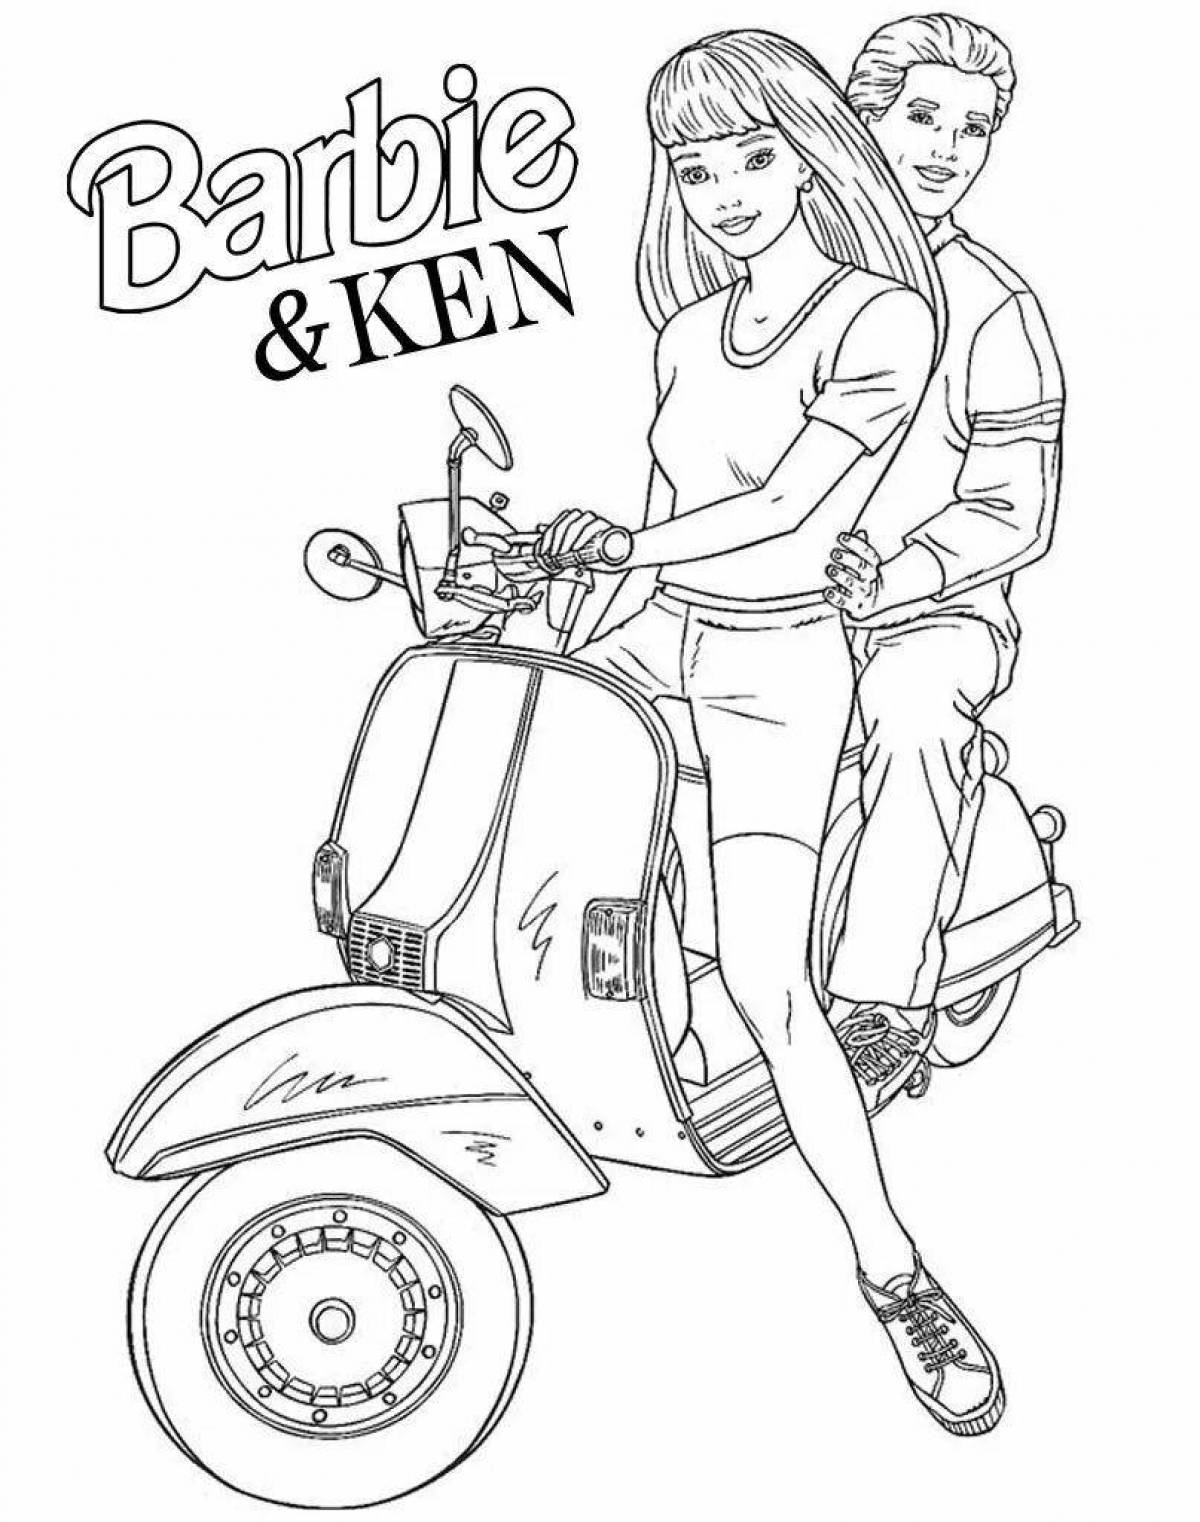 Awesome Barbie and Ken coloring book for girls